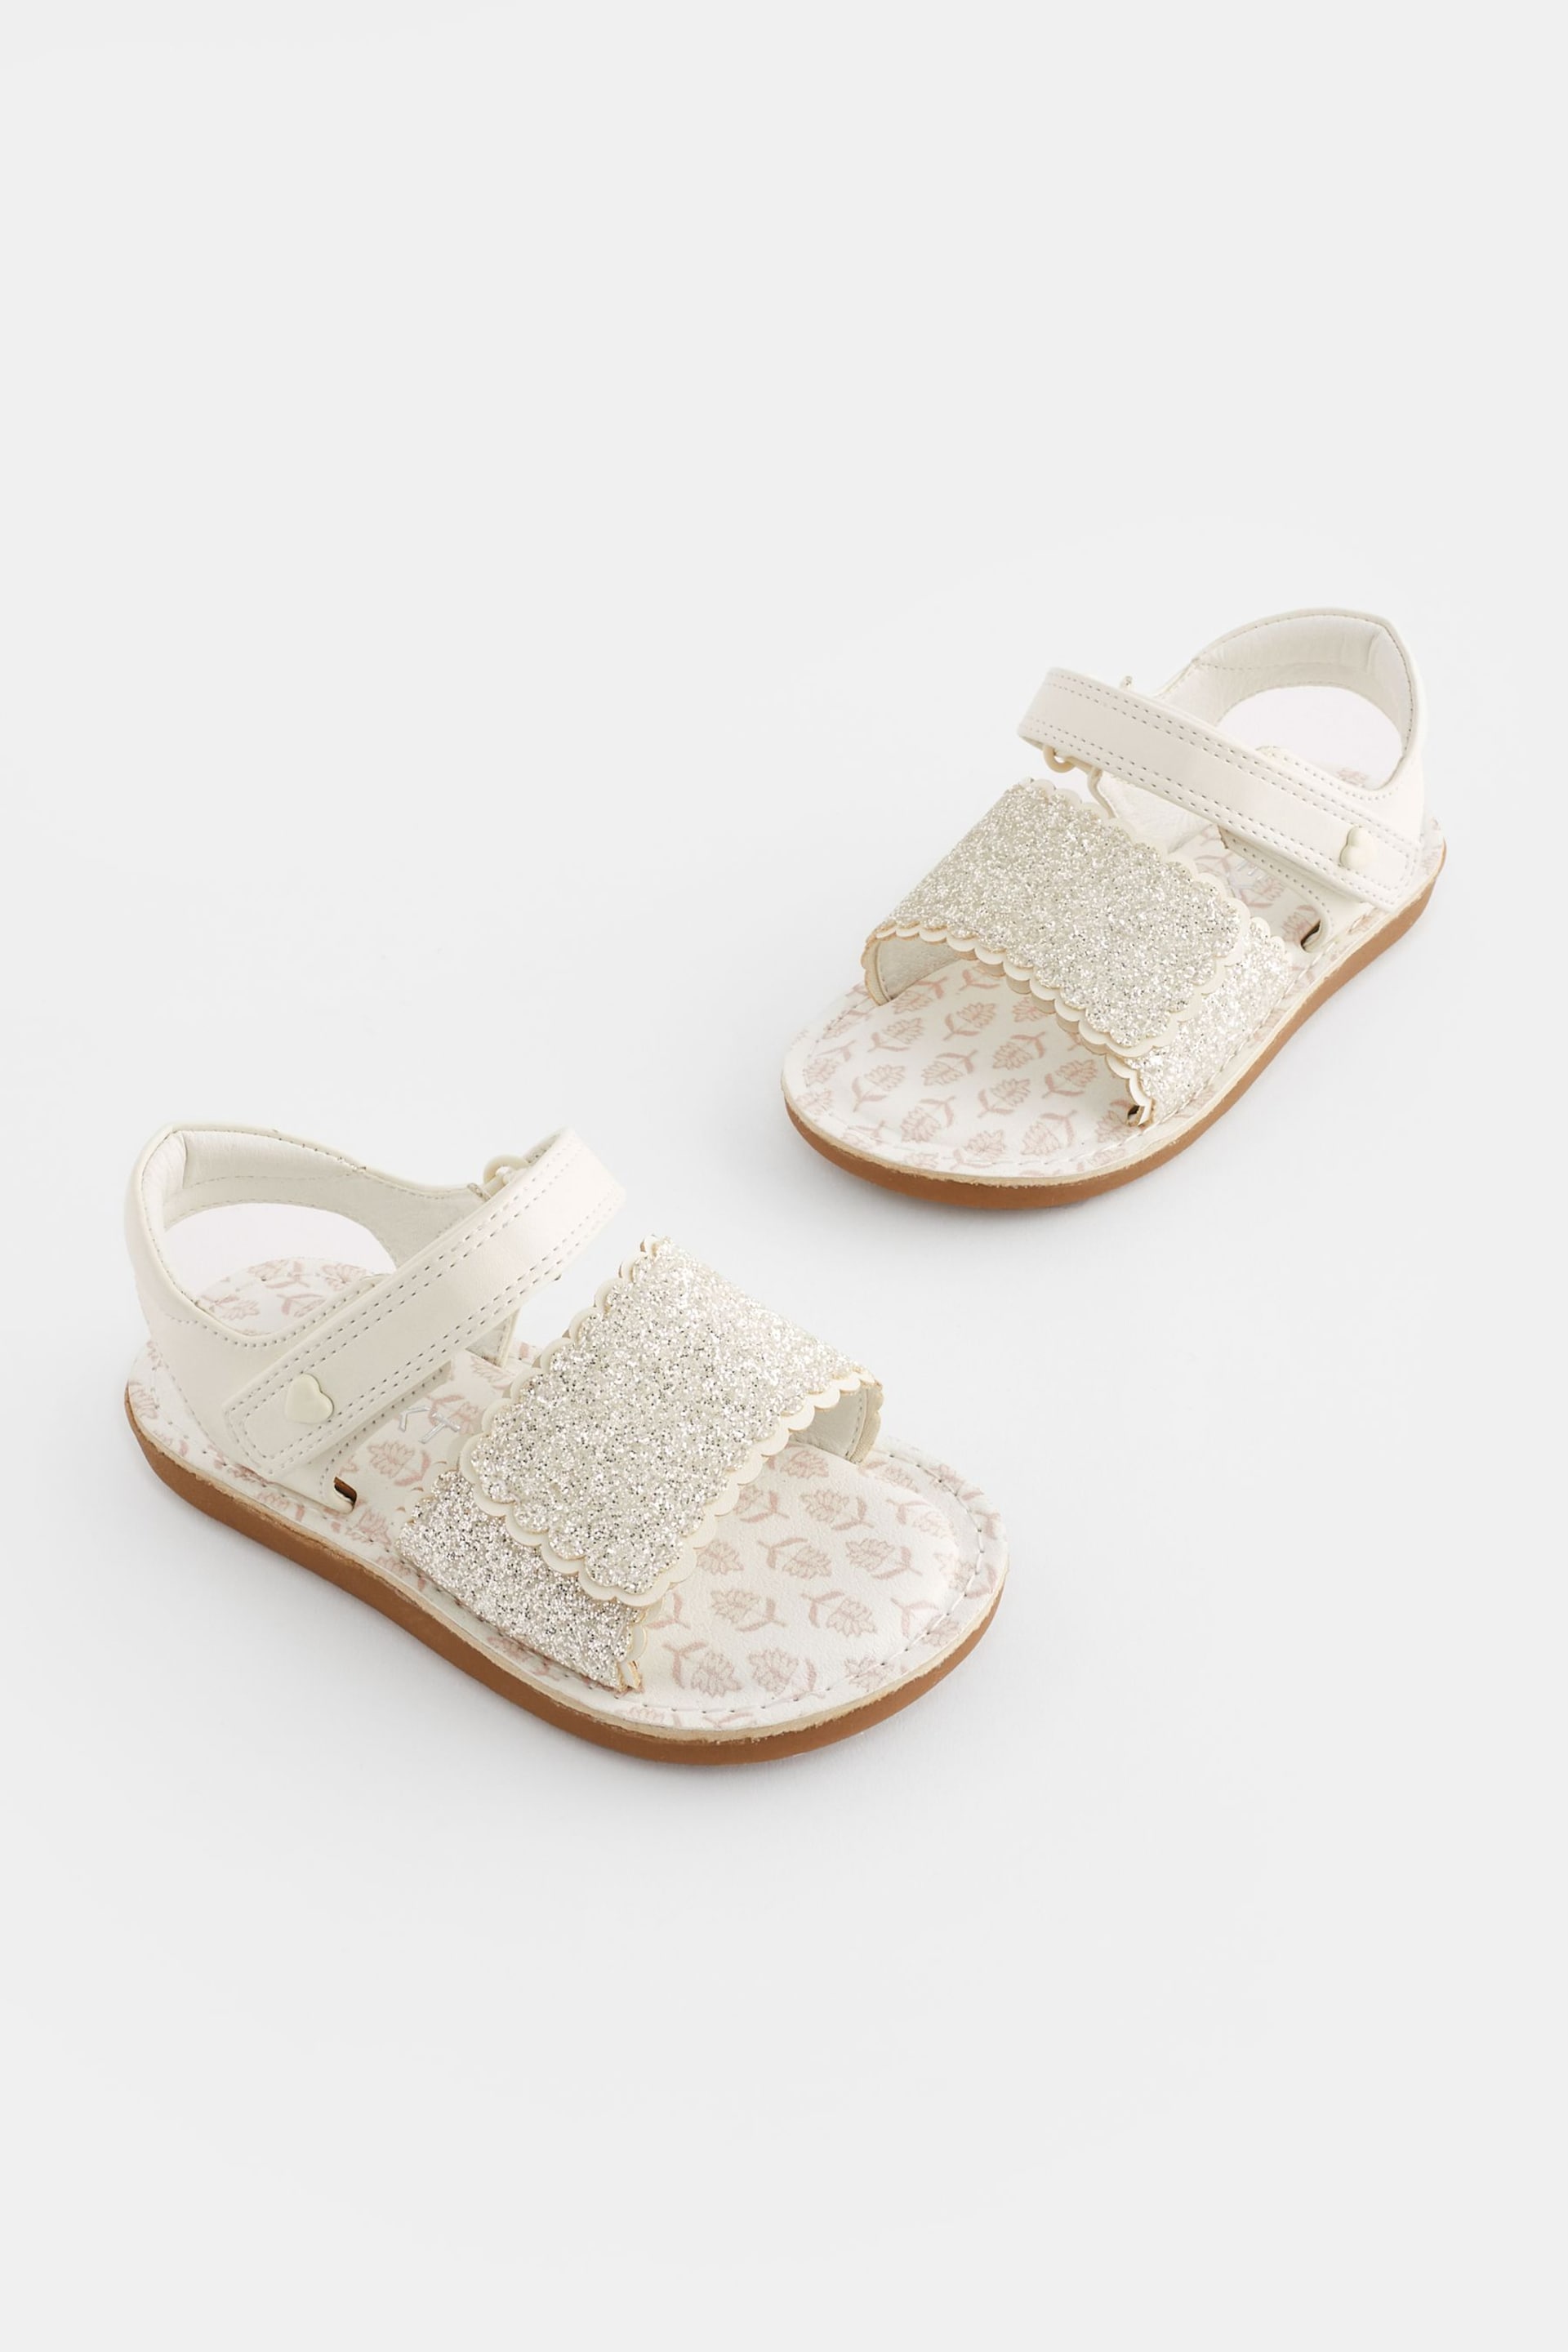 White Glitter Occasion Sandals - Image 1 of 7